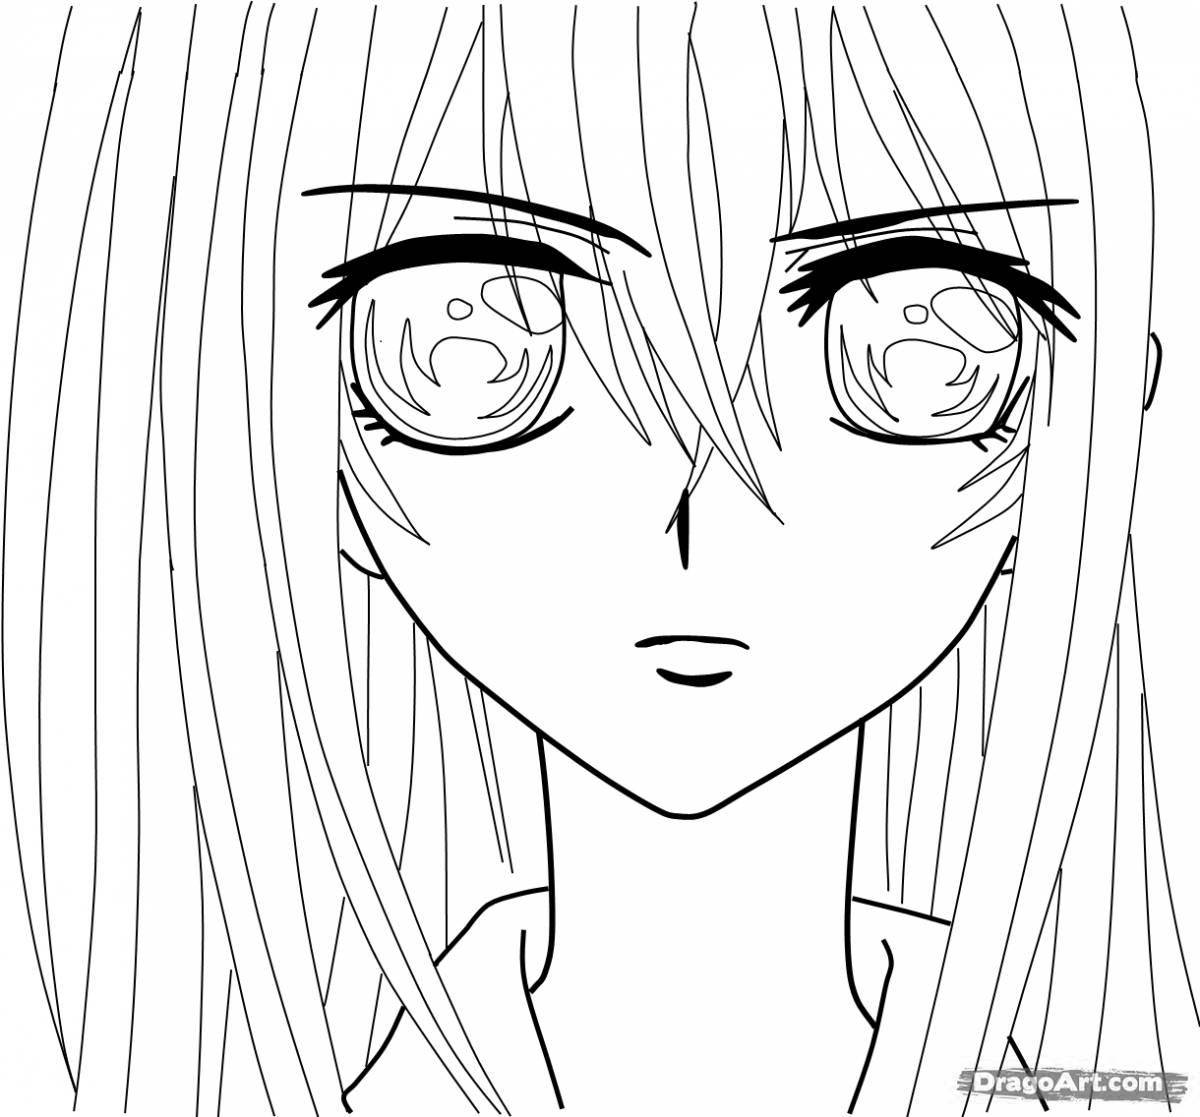 Playful anime face coloring page